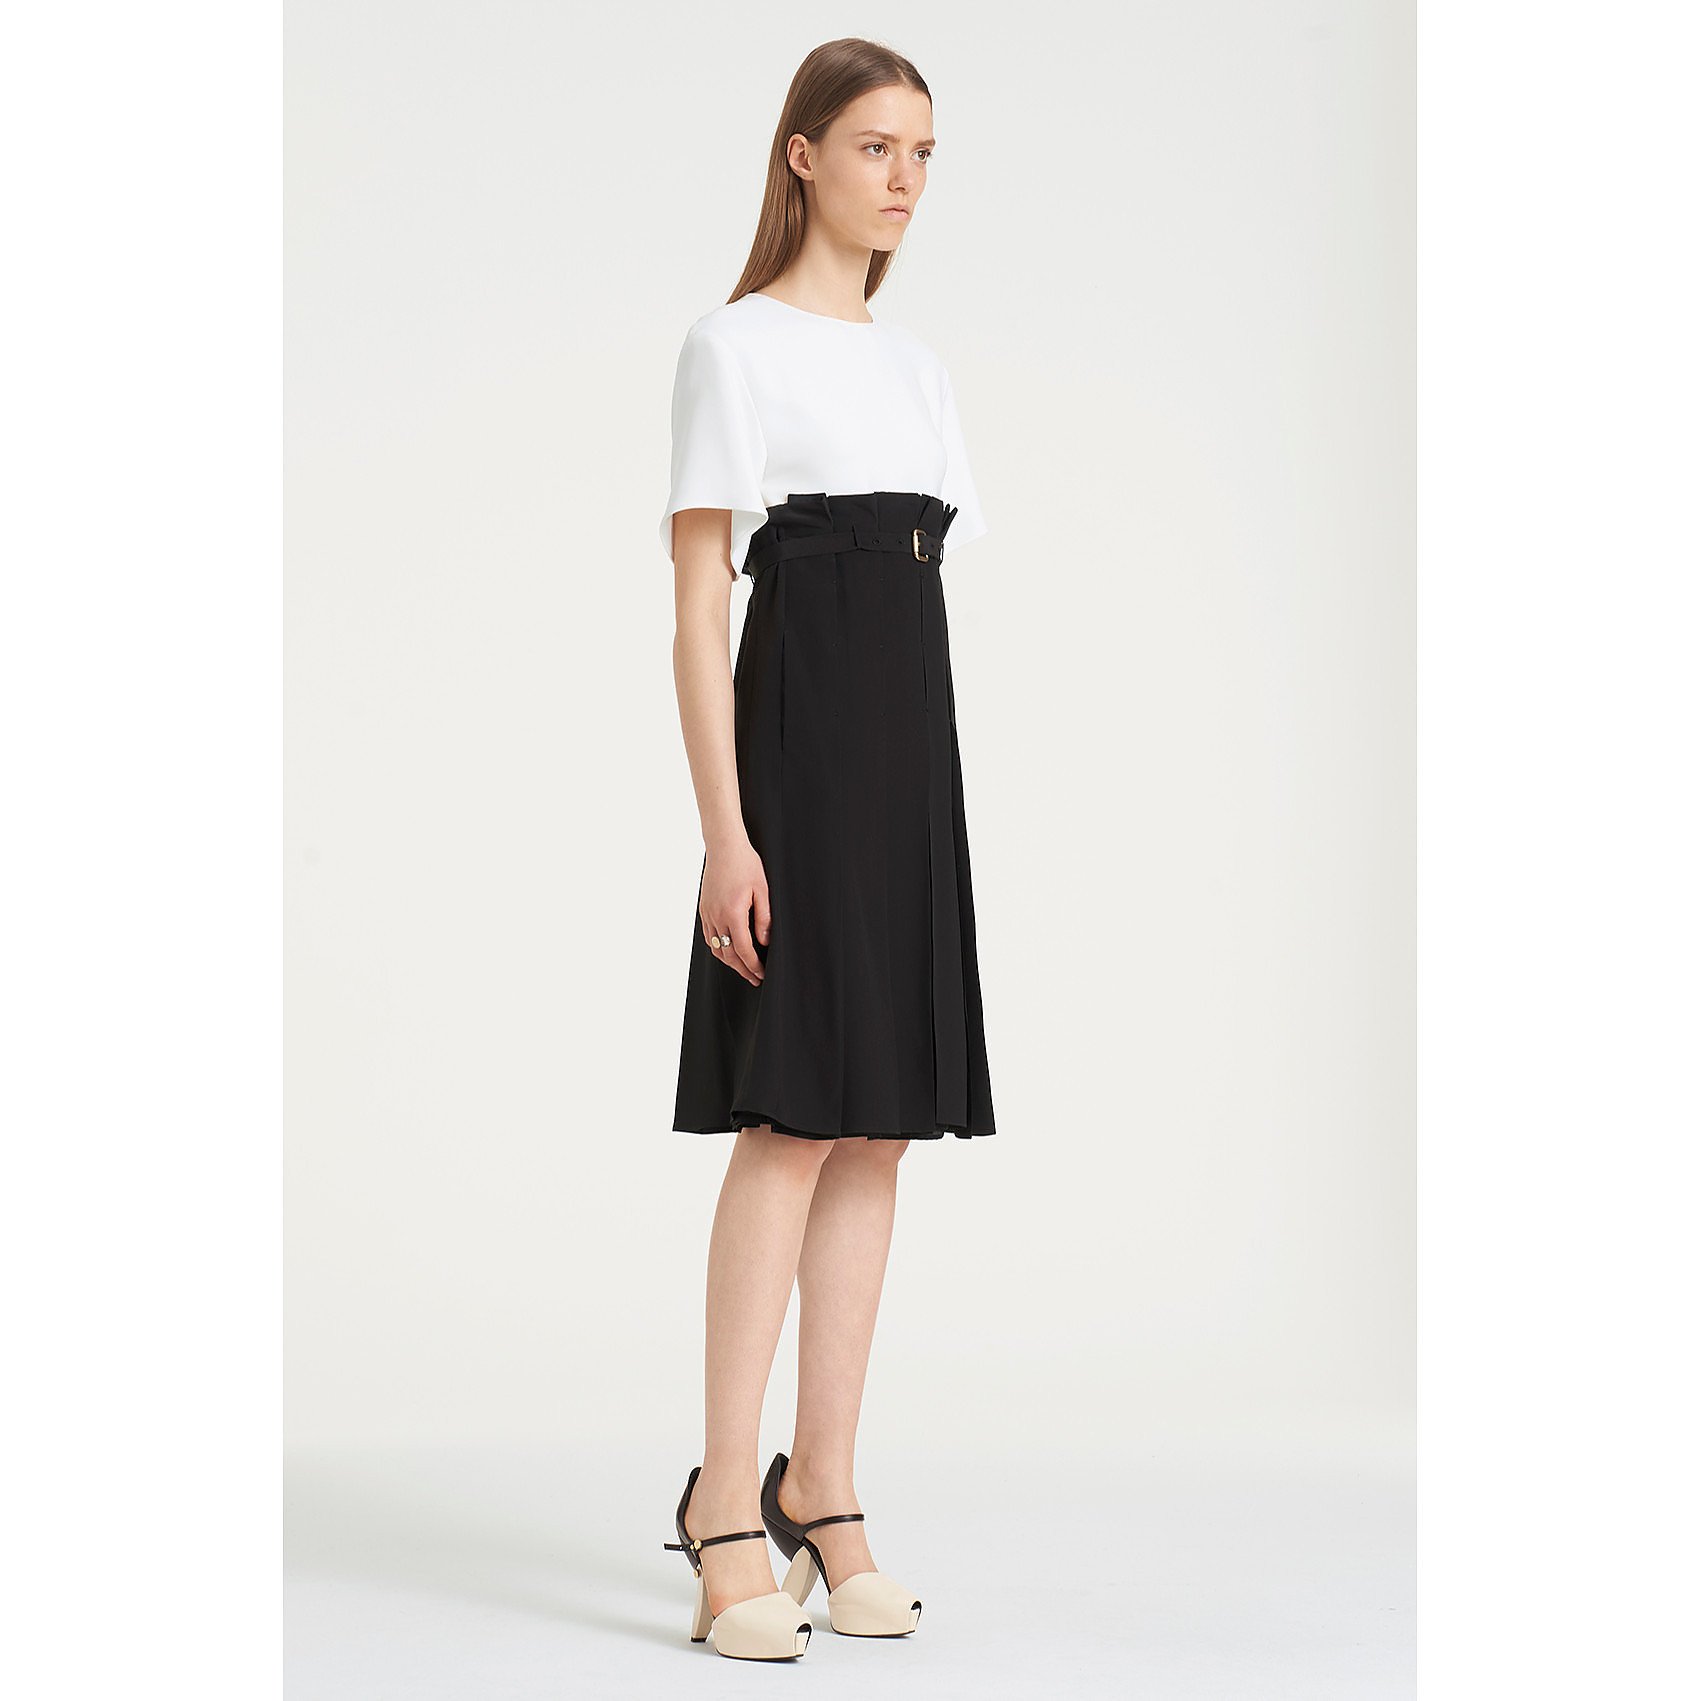 PORTS 1961 Two-Tone Belted Dress